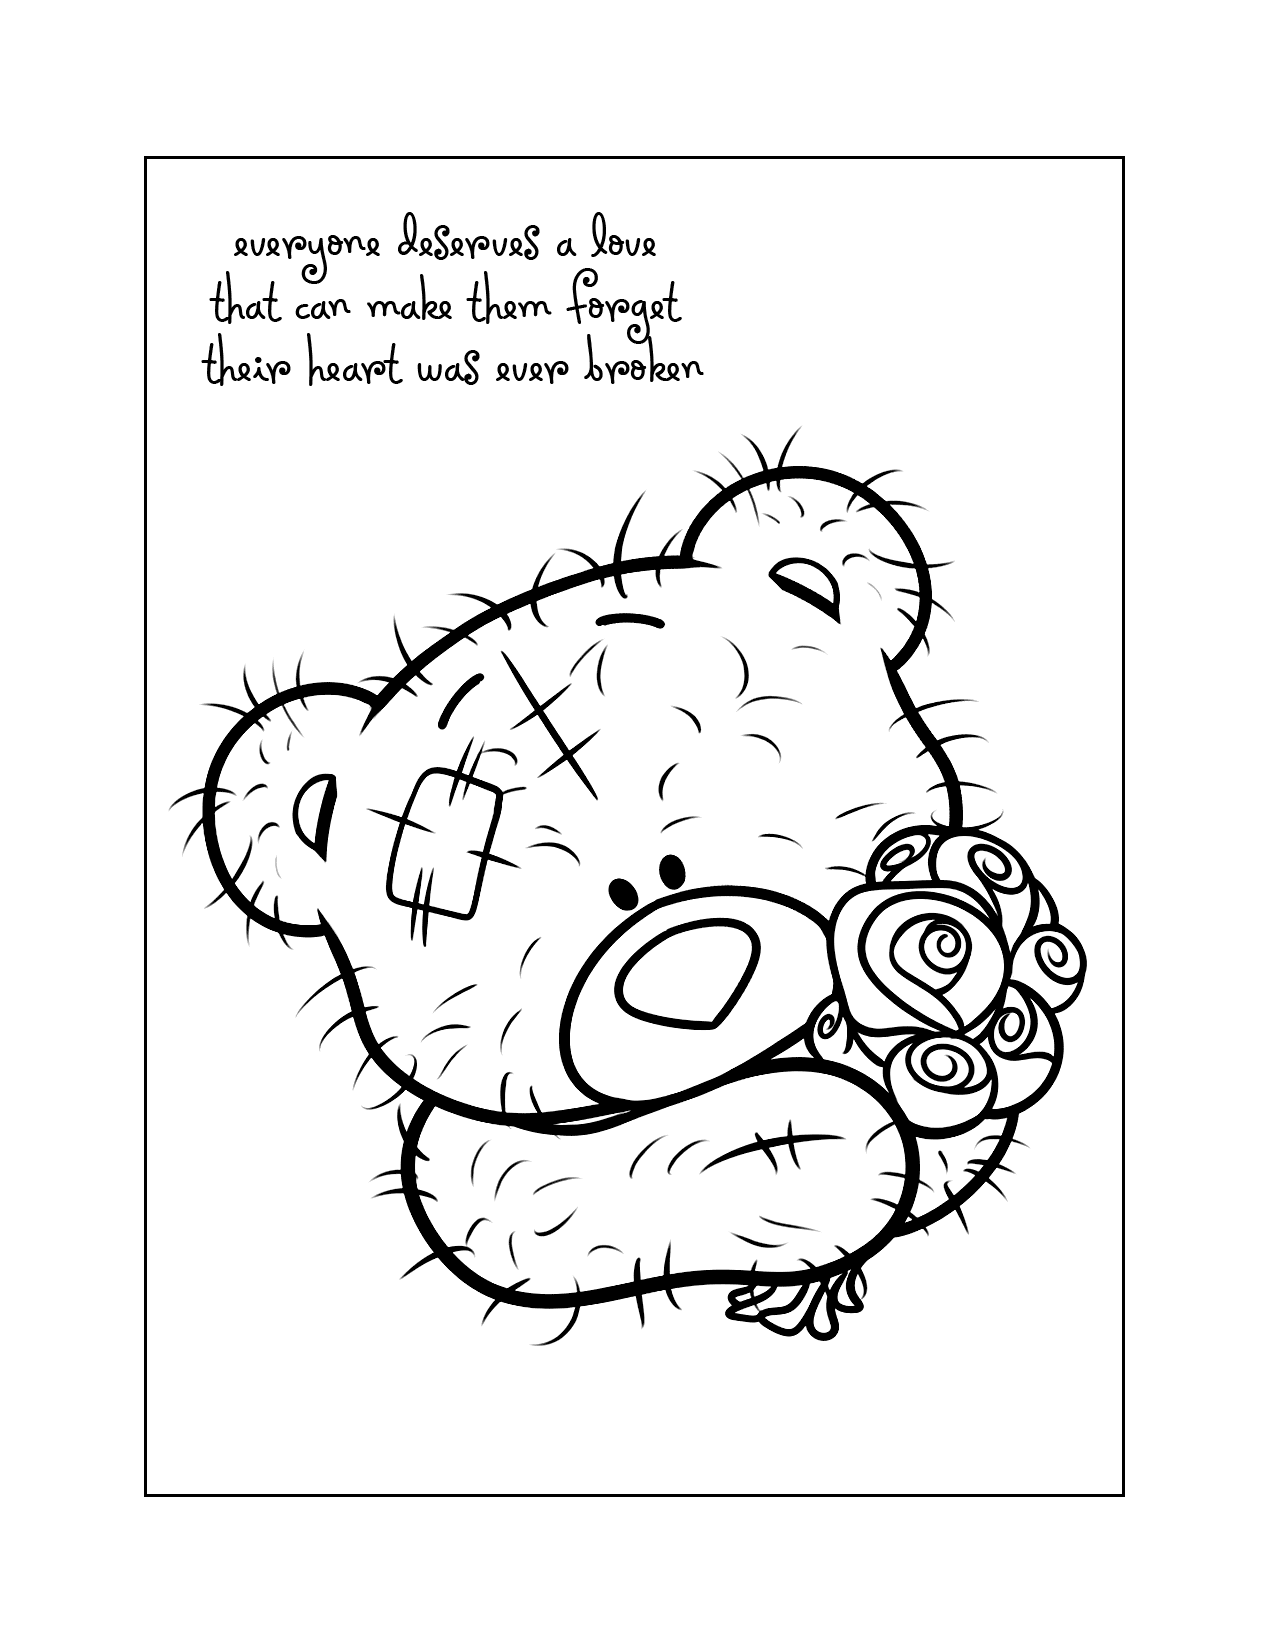 Teddy Bear Love Quote Coloring Page